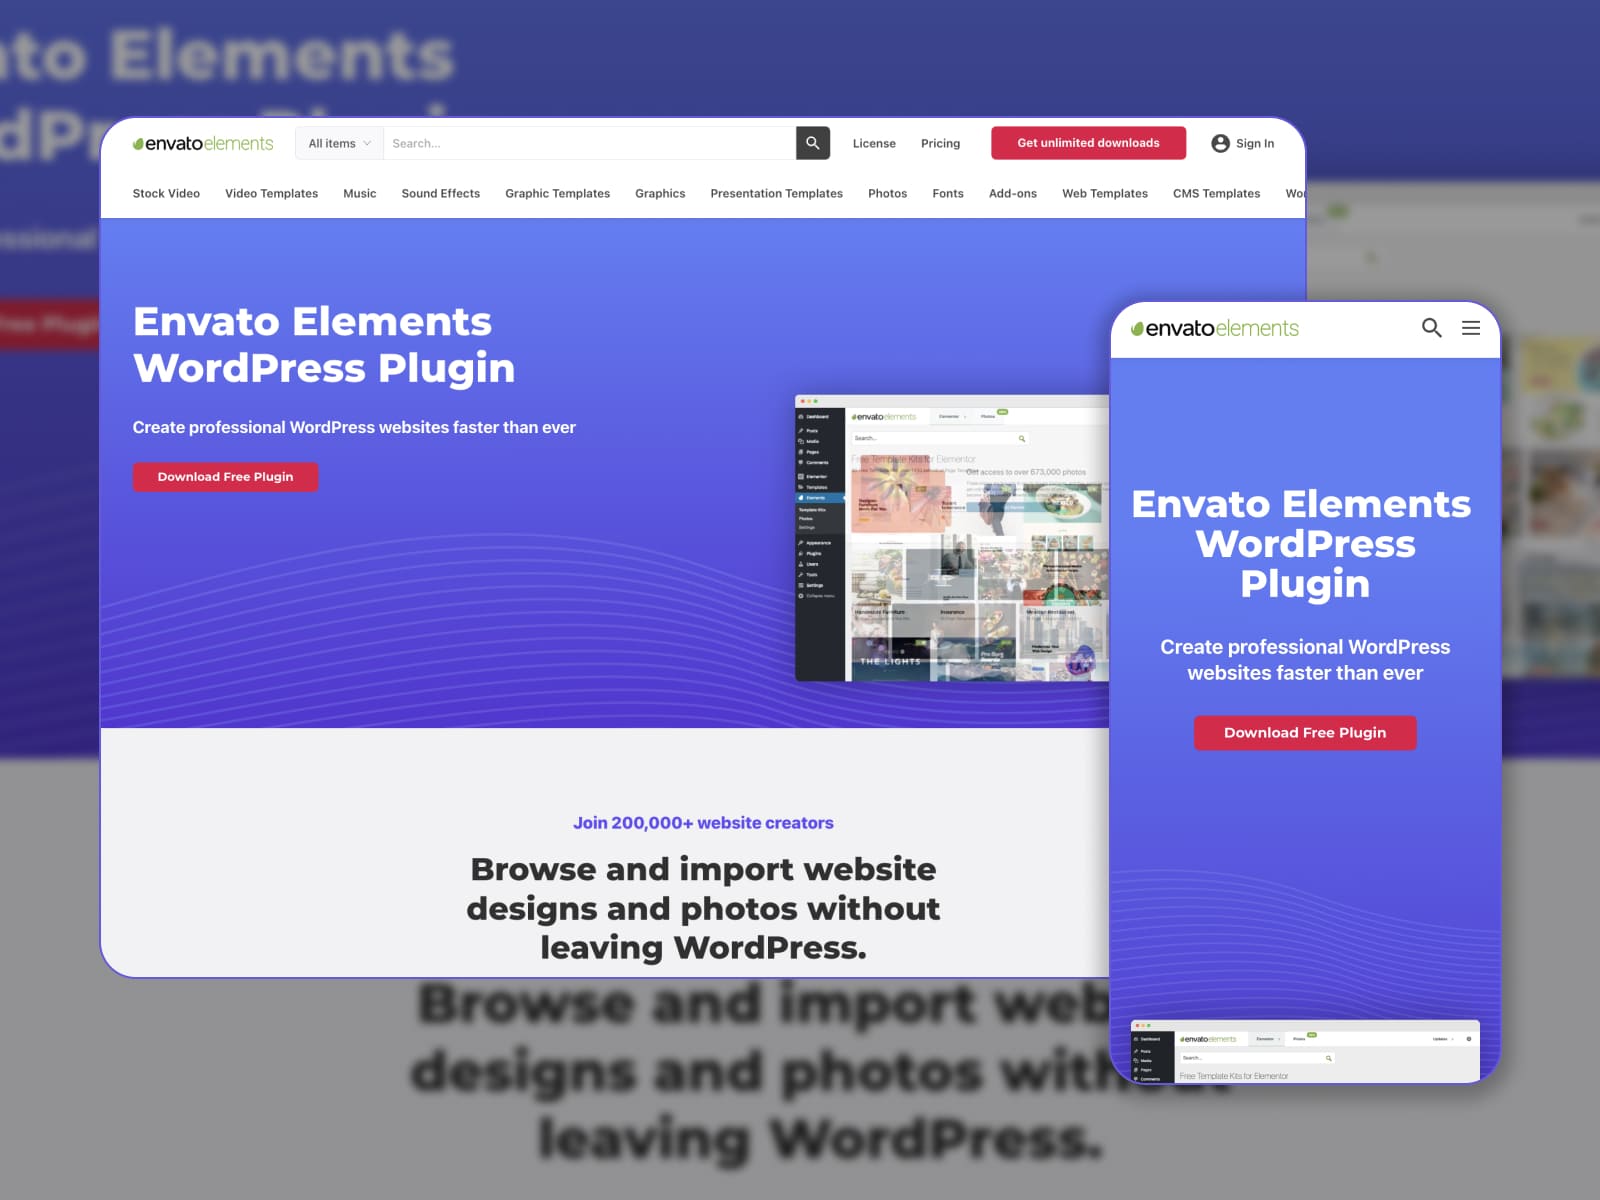 The Envato Elements home page.